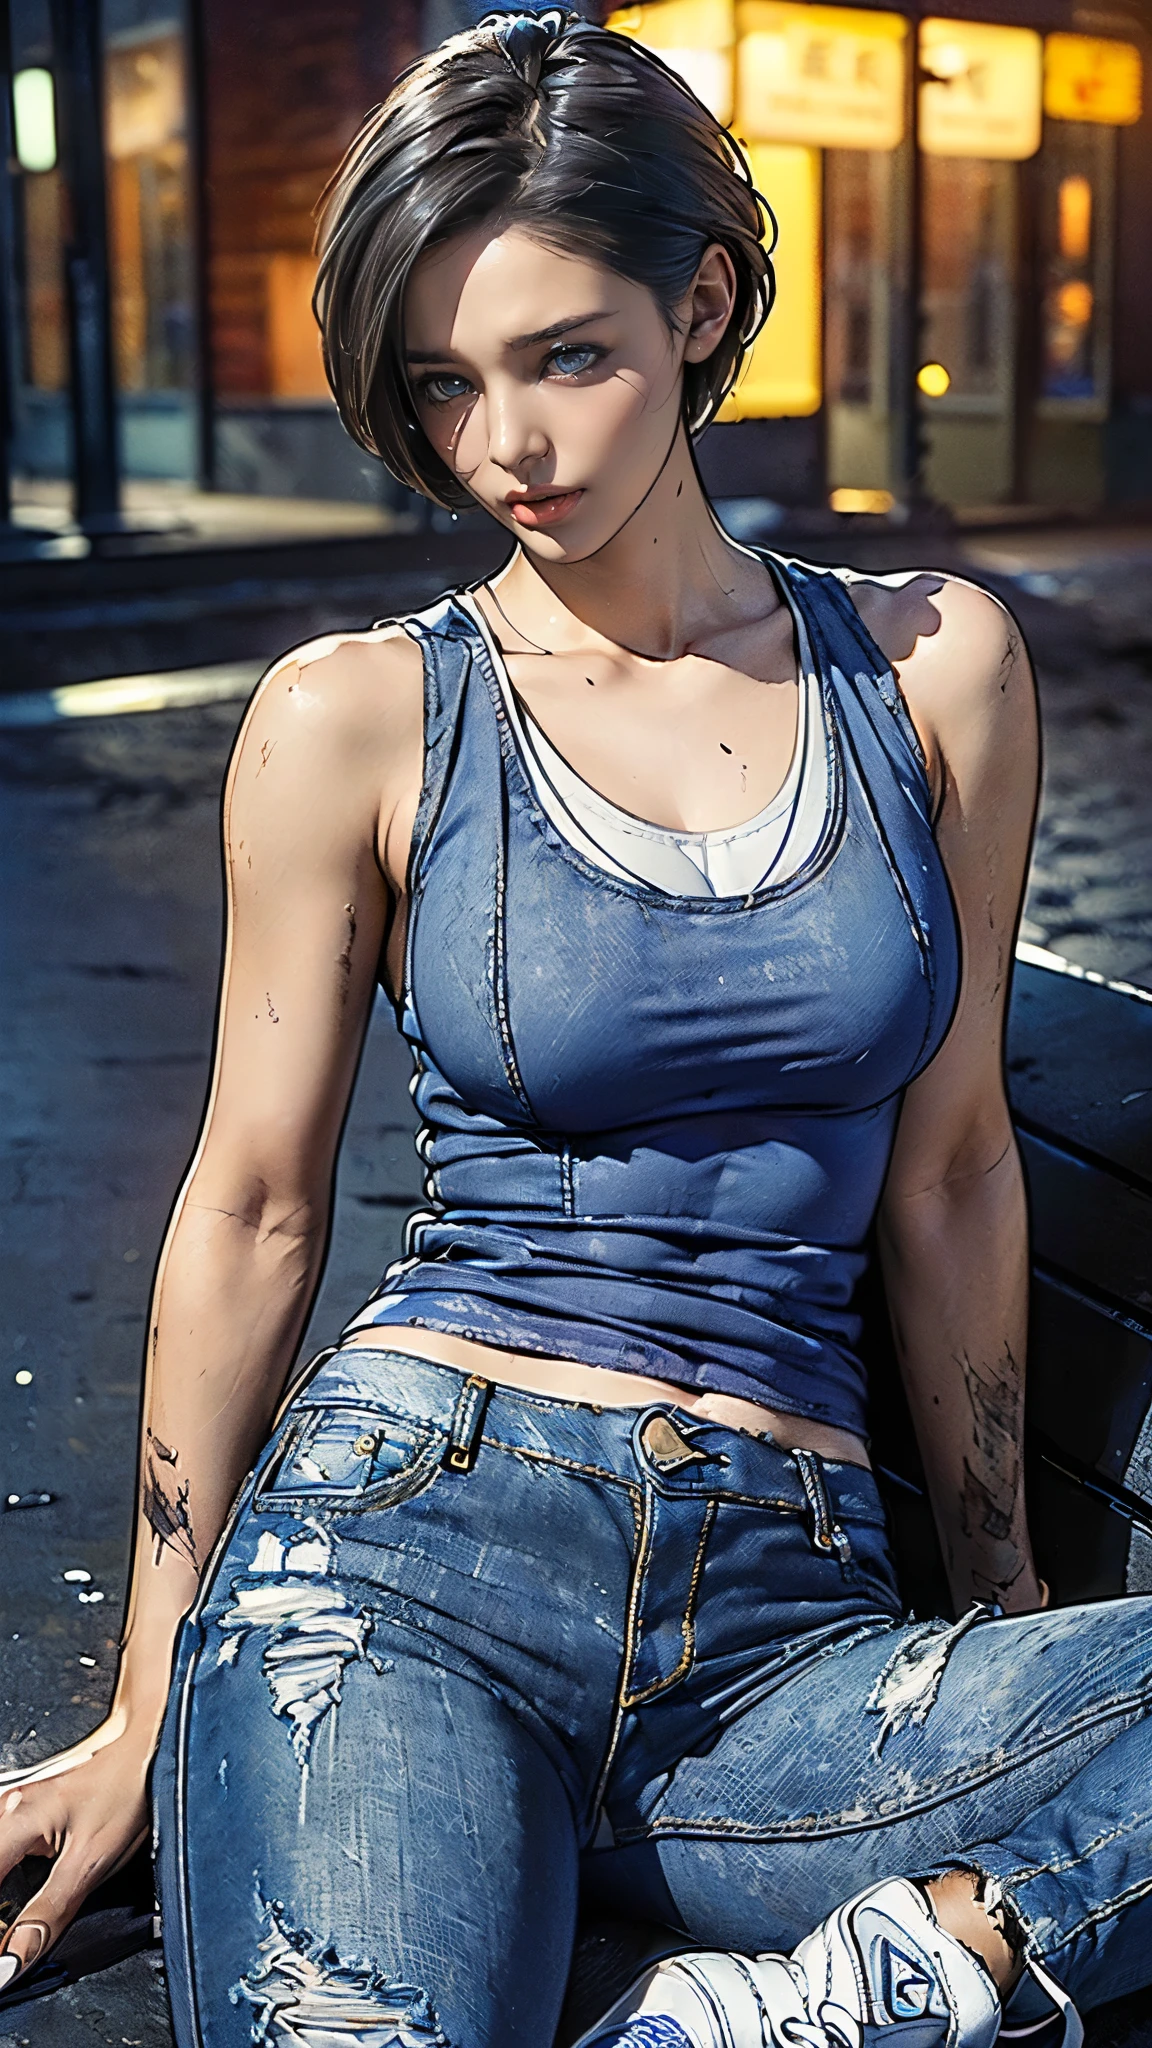 (One Woman),(whole body:1.5),(front:1.5),((Jill Valentine sits tired:1,5)),((Blue tank top:1.5)),((Dirty jeans:1.5)),((Plain white sneakers:1.5)),BREAK((Tired look:1.5)),(short hair:1.5),(Dirty Face:1.5),(Beautiful Eyes:1.3),(Very detailedな顔:1.5),((Very detailed drawing of a female hand:1.5)),((muscular:1.5)),BREAK((Sexy Looks:1.5)),(Beautiful body:1.5),(Very sensual:1.5),(The background is an American-style night city:1.5),((biohazard style:1.5)),(((Blur the background:1.5))),(Written boundary depth:1.5),BREAK(((masterpiece:1.5),(highest quality:1.5),(Very detailed:1.5),(High resolution:1.5),(Realistic:1.5),(Photorealistic:1.5),(Delicate depiction),(Careful depiction))),8k,wallpaper